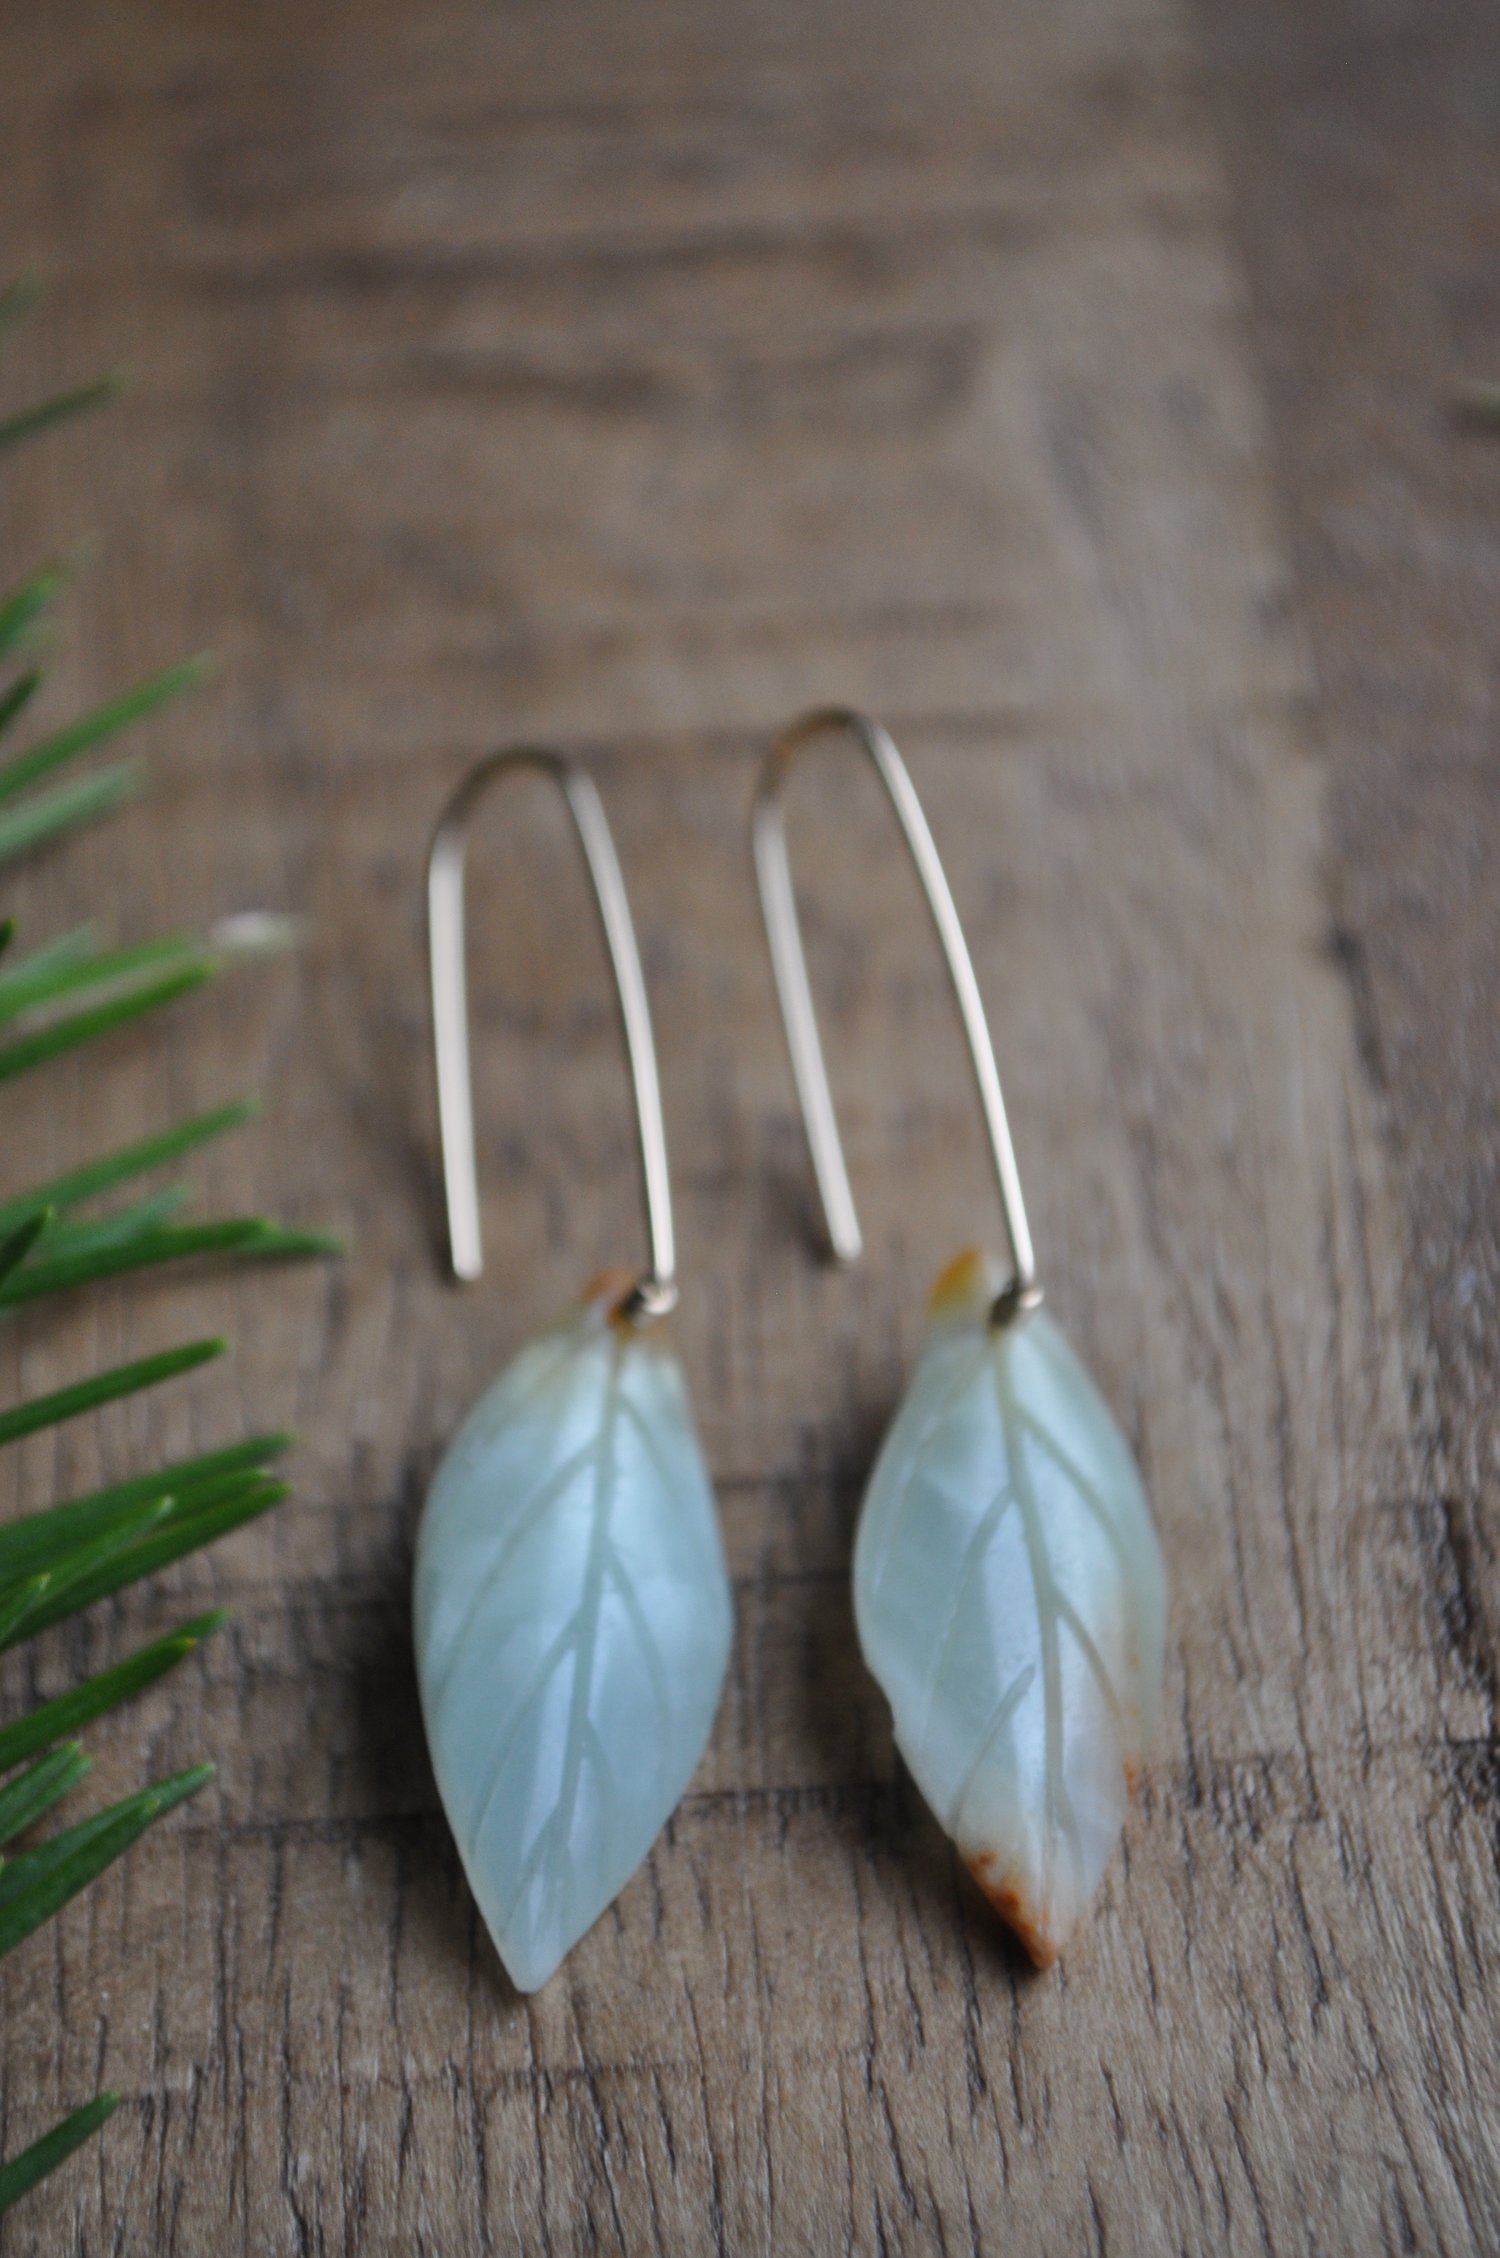 Image of OOAK Carved Amazonite Leaves on Gold Fill